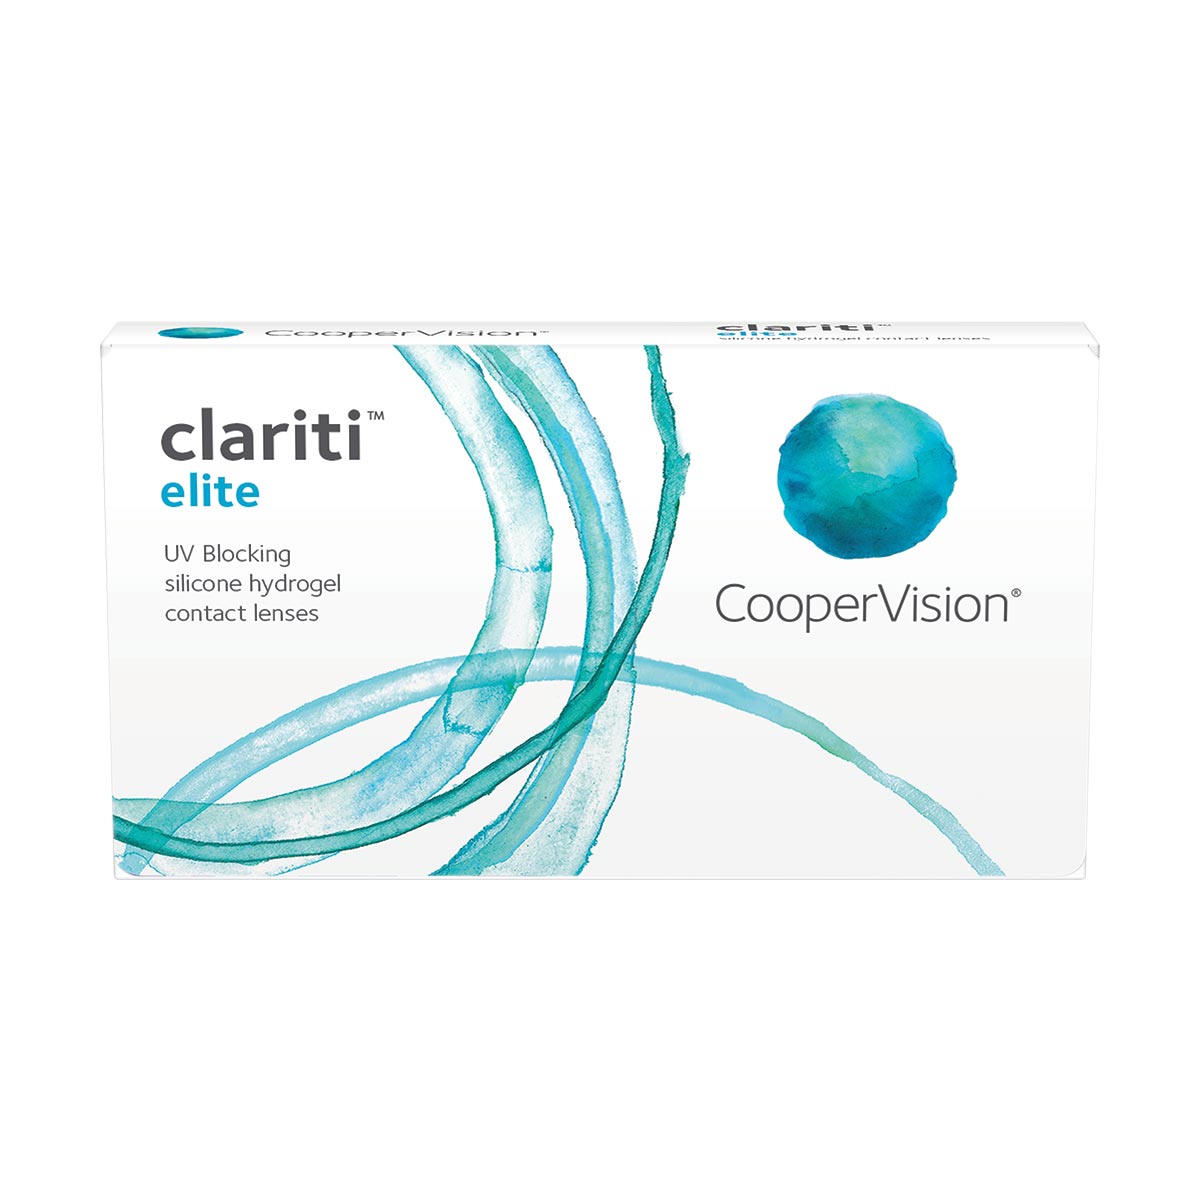 Soflens® Daily Disposable for Astigmatism 30 lentes - Lentes de Contacto - Lentes de Contacto Diárias